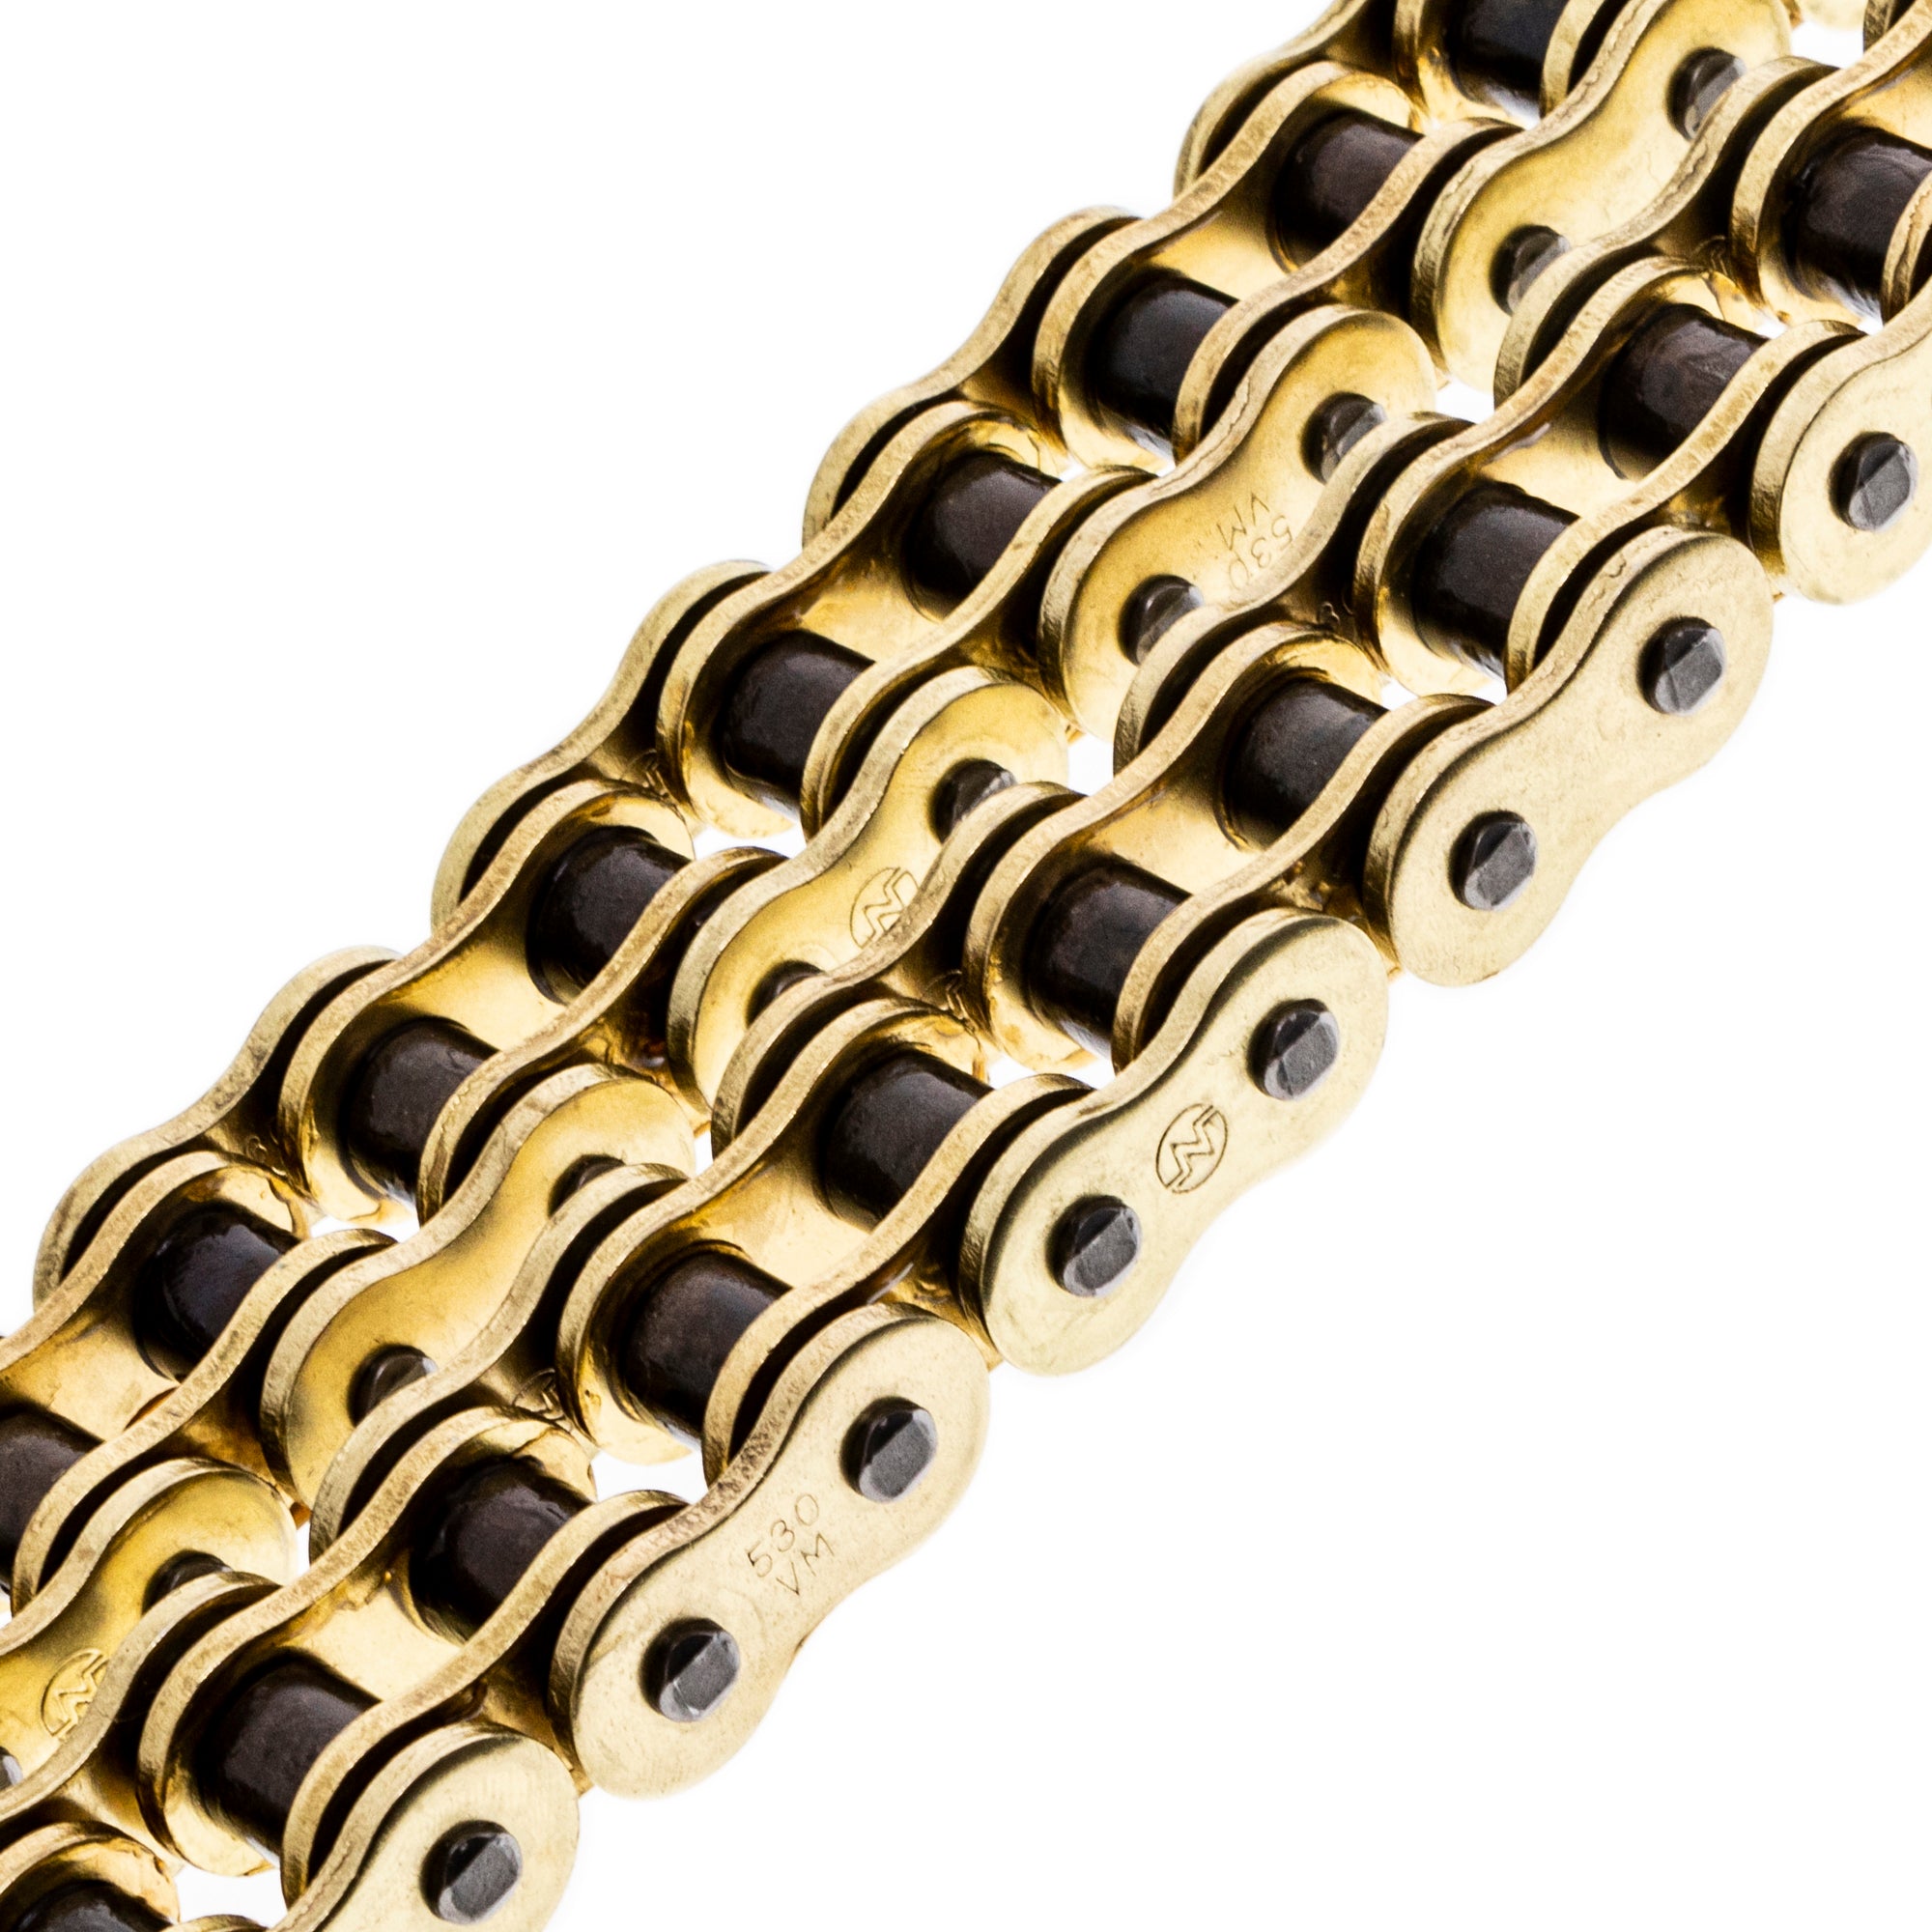 Gold X-Ring Chain 122 w/ Master Link for zOTHER Yamaha 94582-10122-00 5495 530VX-122 NICHE 519-CDC2506H